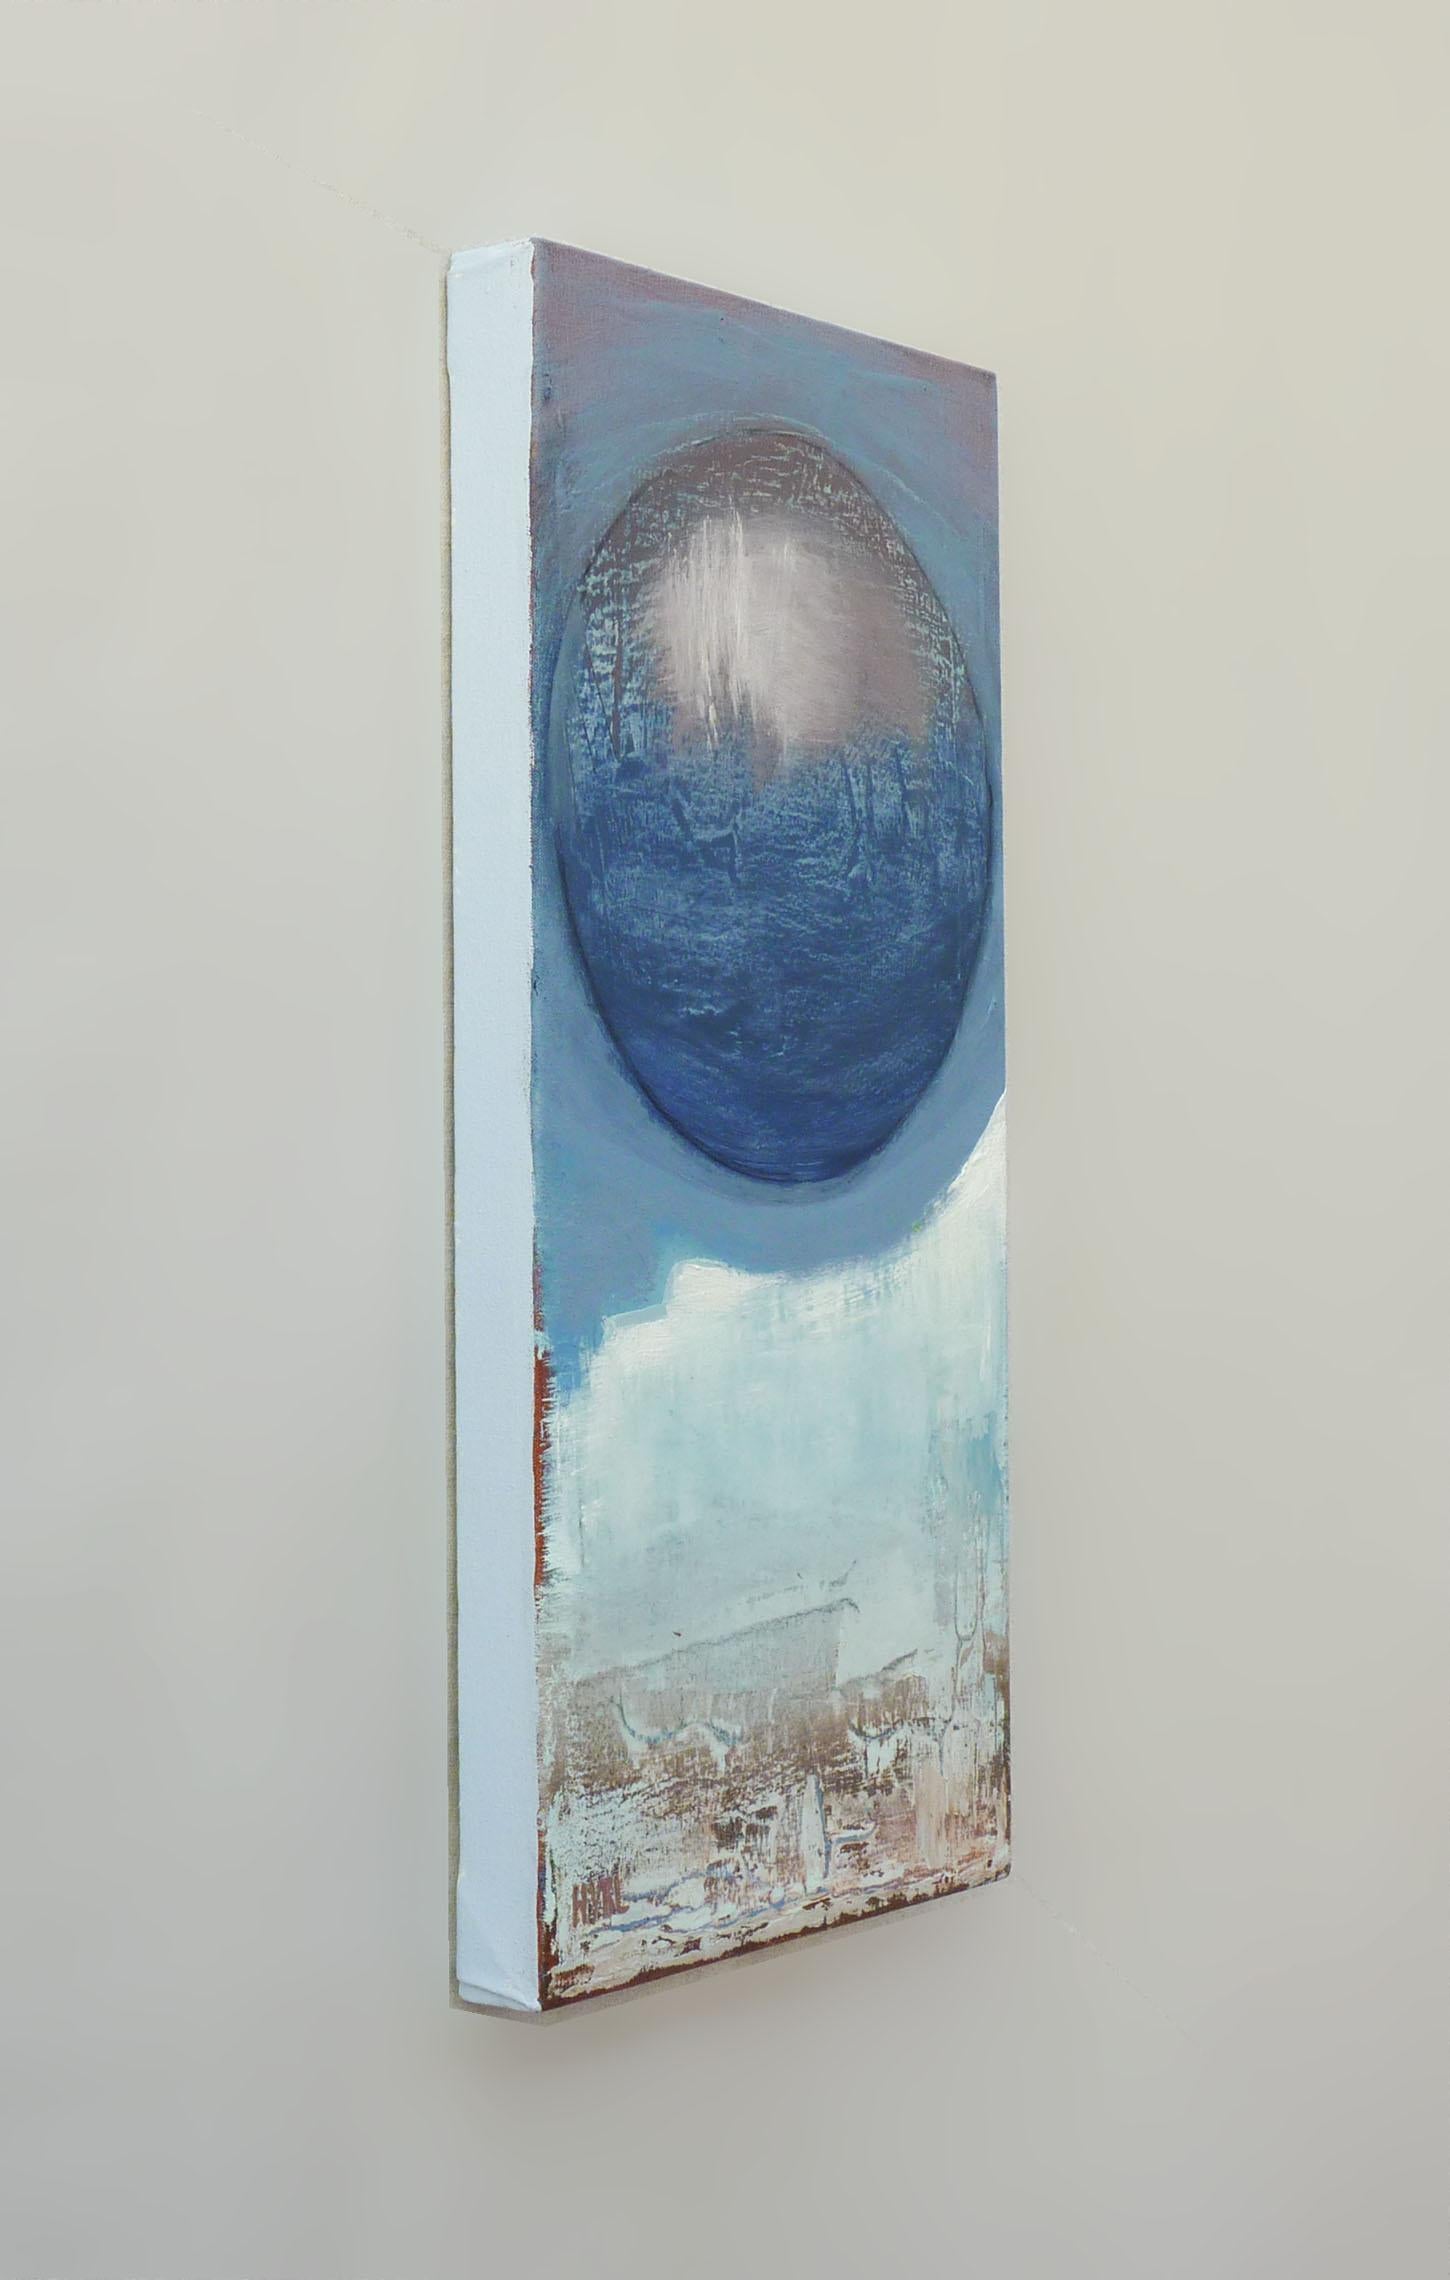 <p>Artist Comments<br>Artist Heidi Hybl presents a modern abstract with a hovering celestial sphere. She experiments with a scraped-off image and ends up with a shape that appears intriguing and worth keeping. 